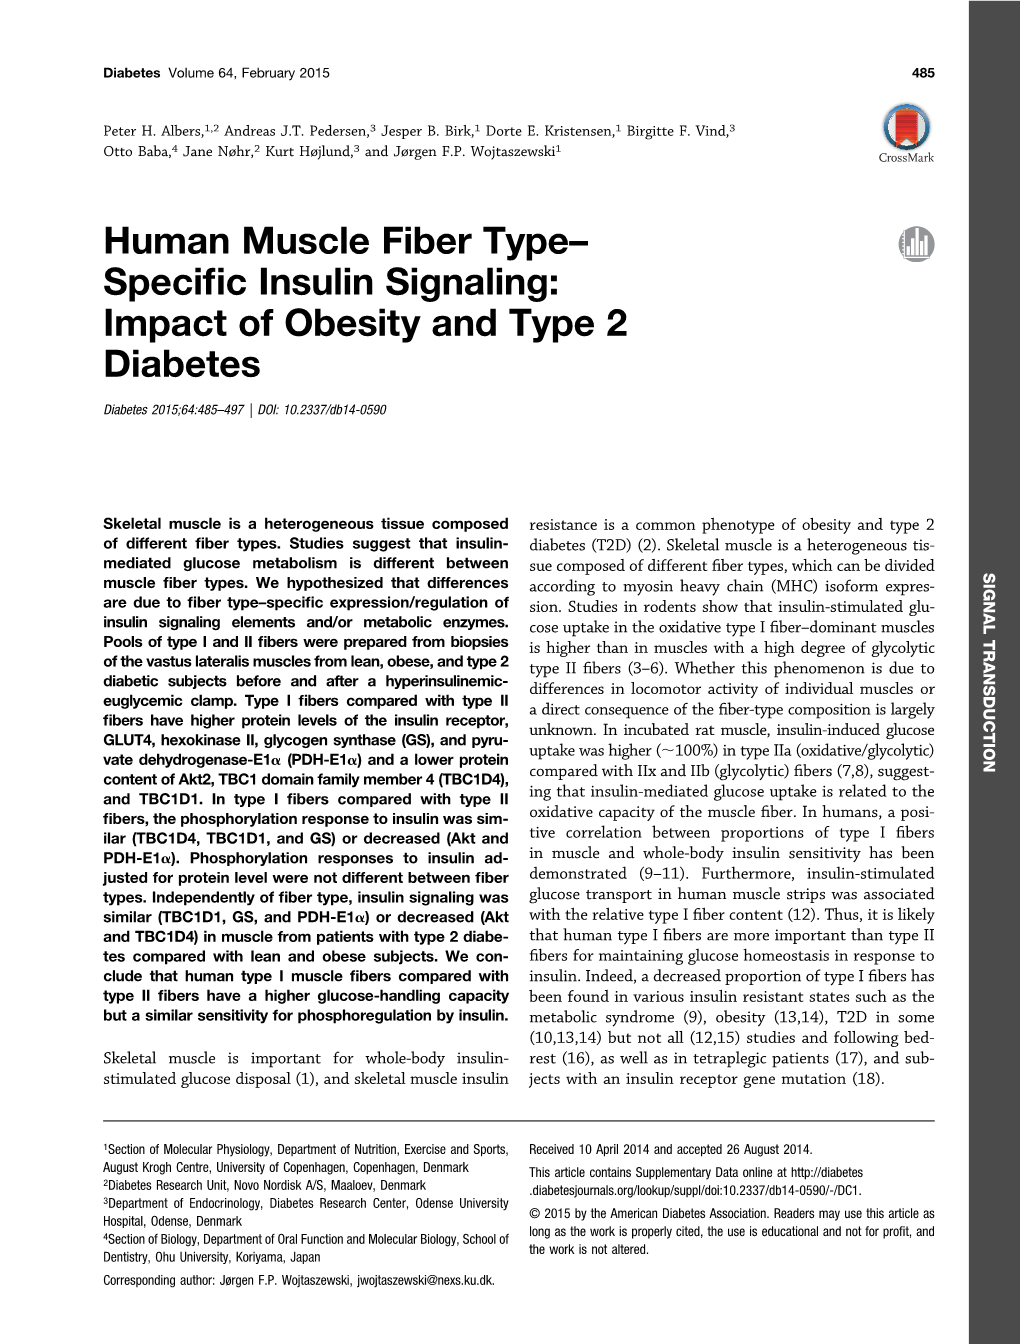 Human Muscle Fiber Type– Specific Insulin Signaling: Impact of Obesity and Type 2 Diabetes